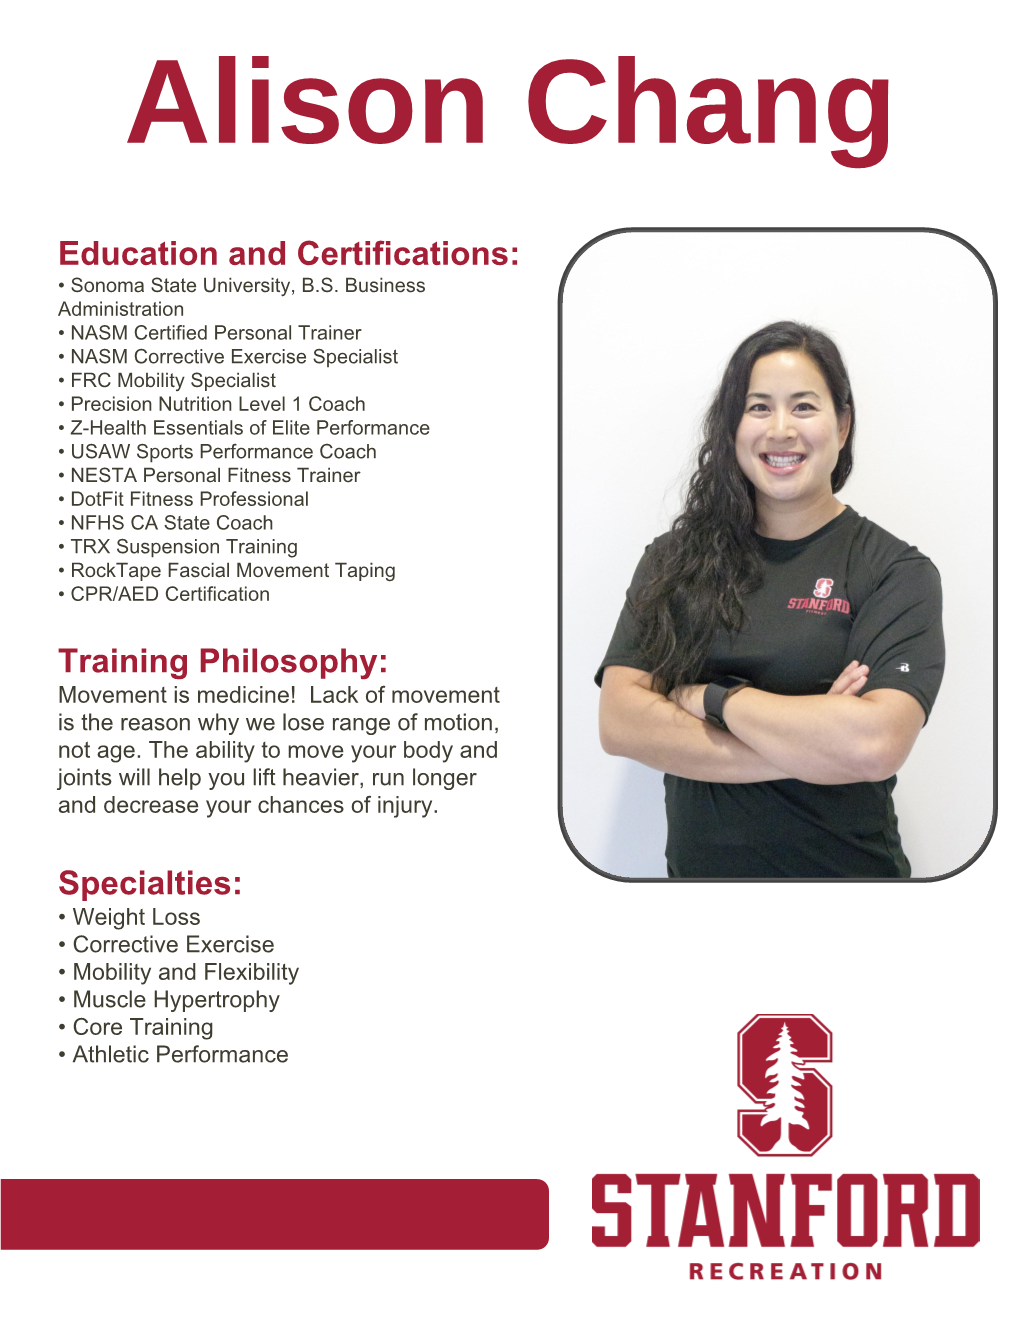 Education and Certifications: Specialties: Training Philosophy